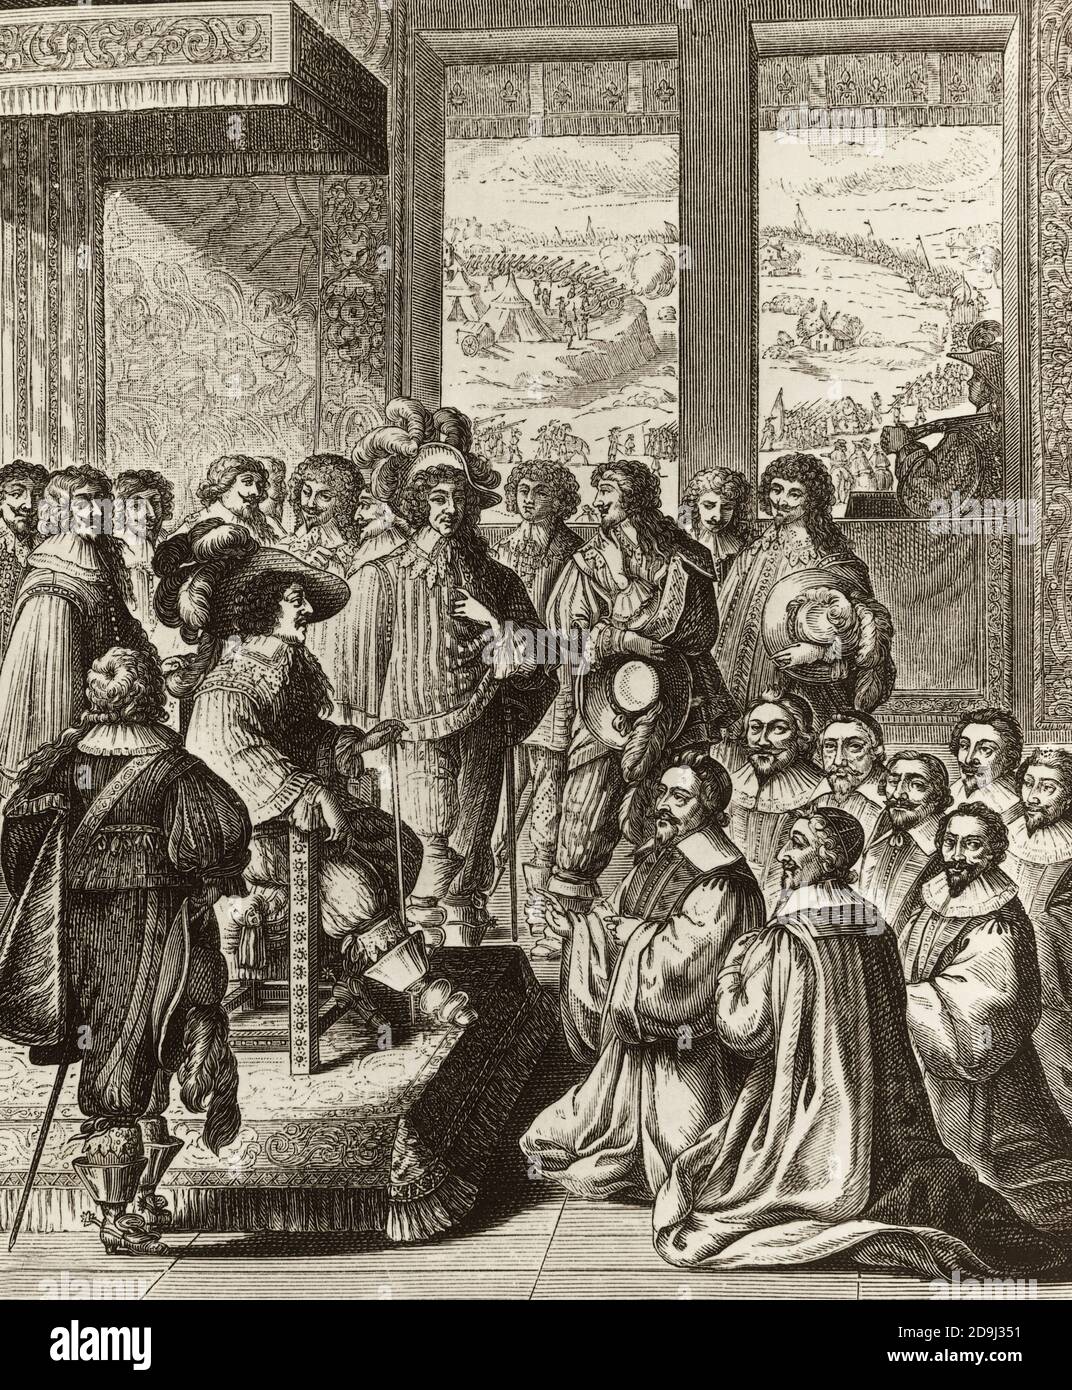 Louis XIII, seated on a throne, surrounded by noblemen, receives the prévot des marchand and the echevins of Paris after the capture of La Rochelle - Stock Photo